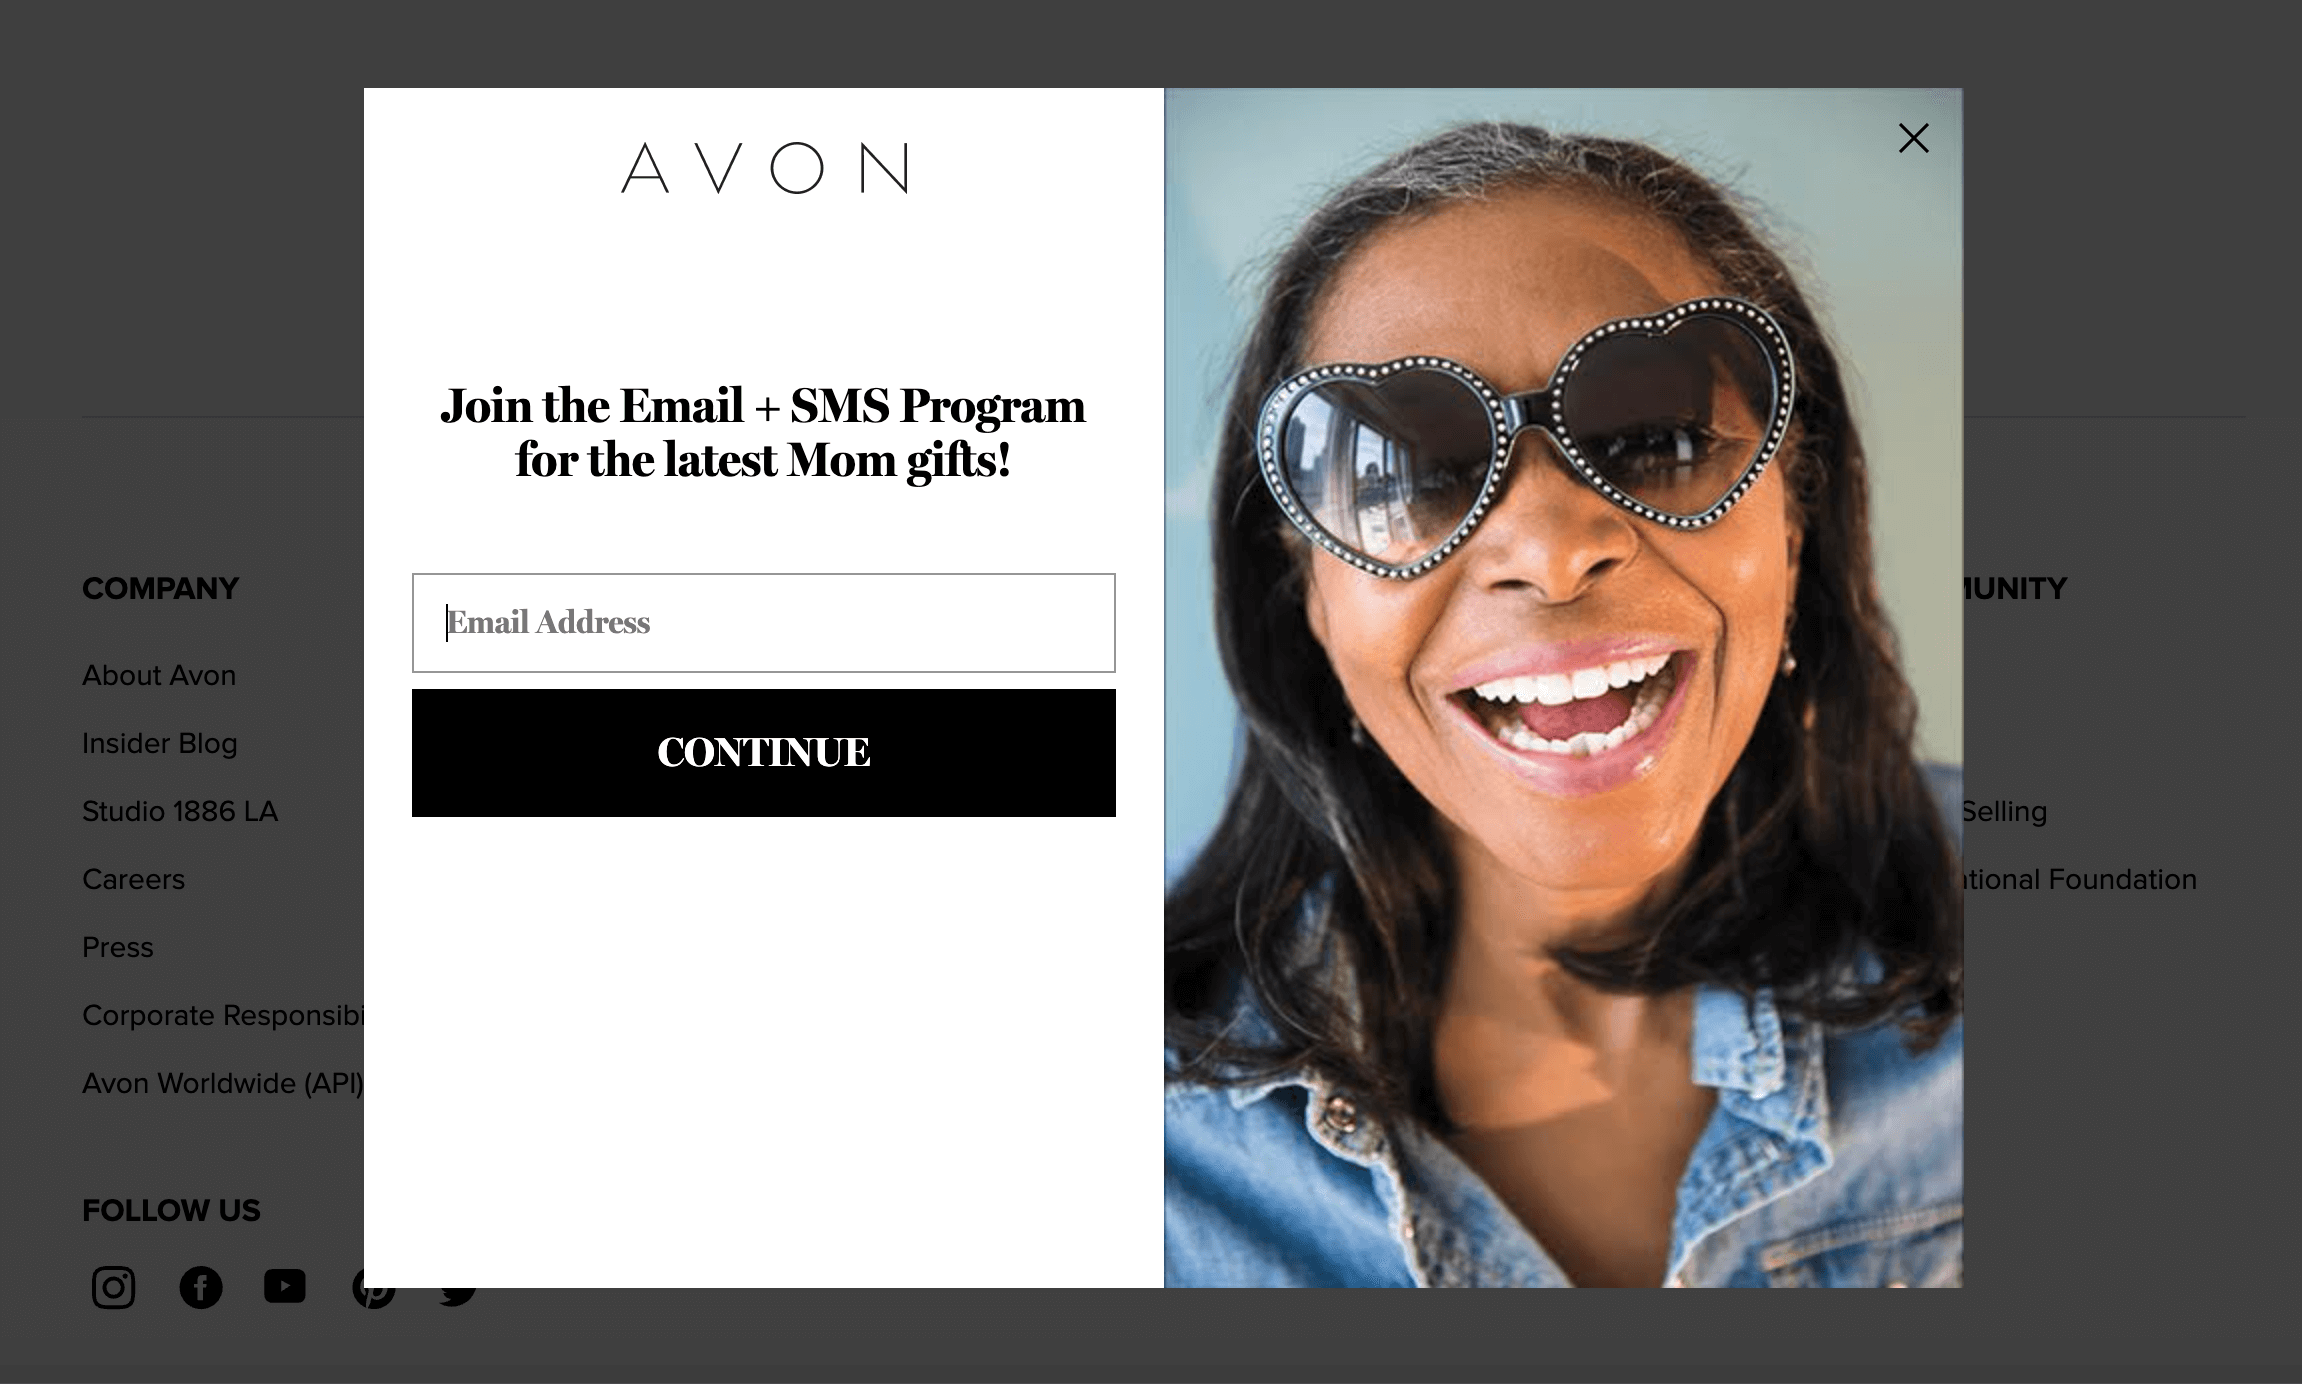 A pop-up example by Avon